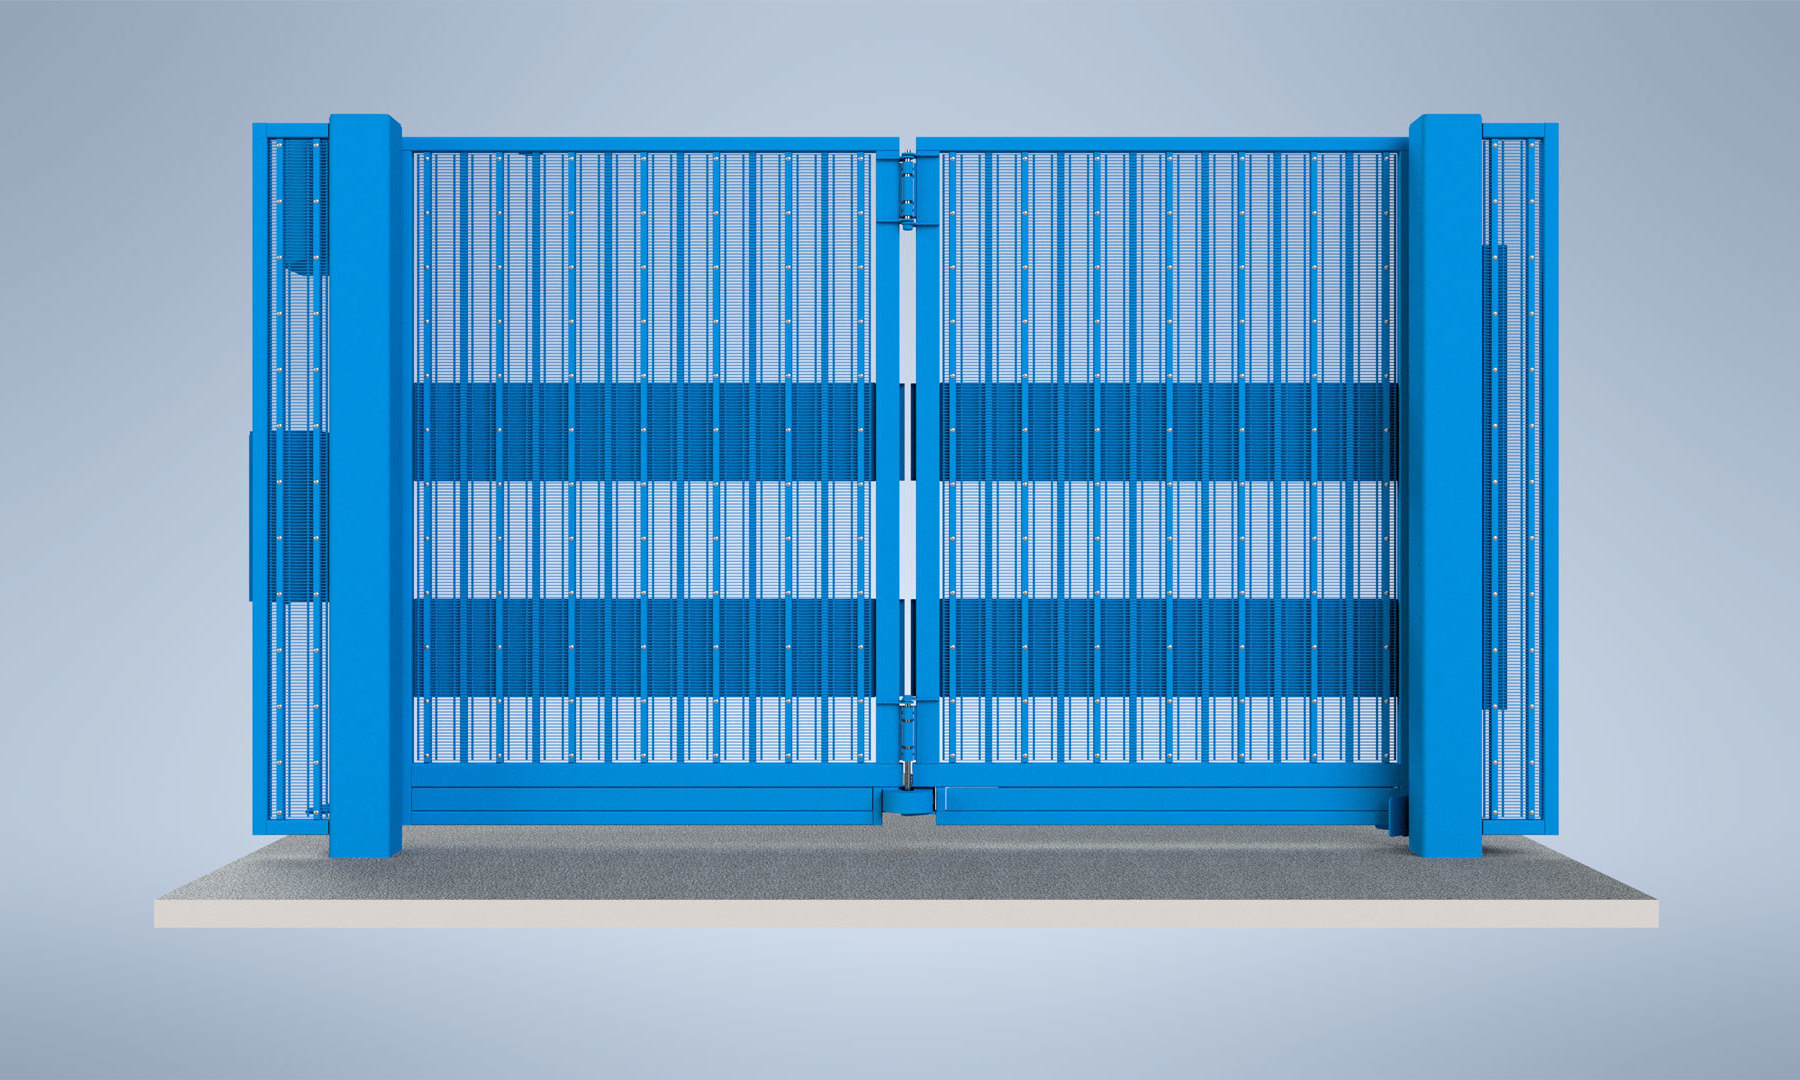 CSG 10640 & 10650 folding gates withstanding impacts of up to 40mph or 50mph